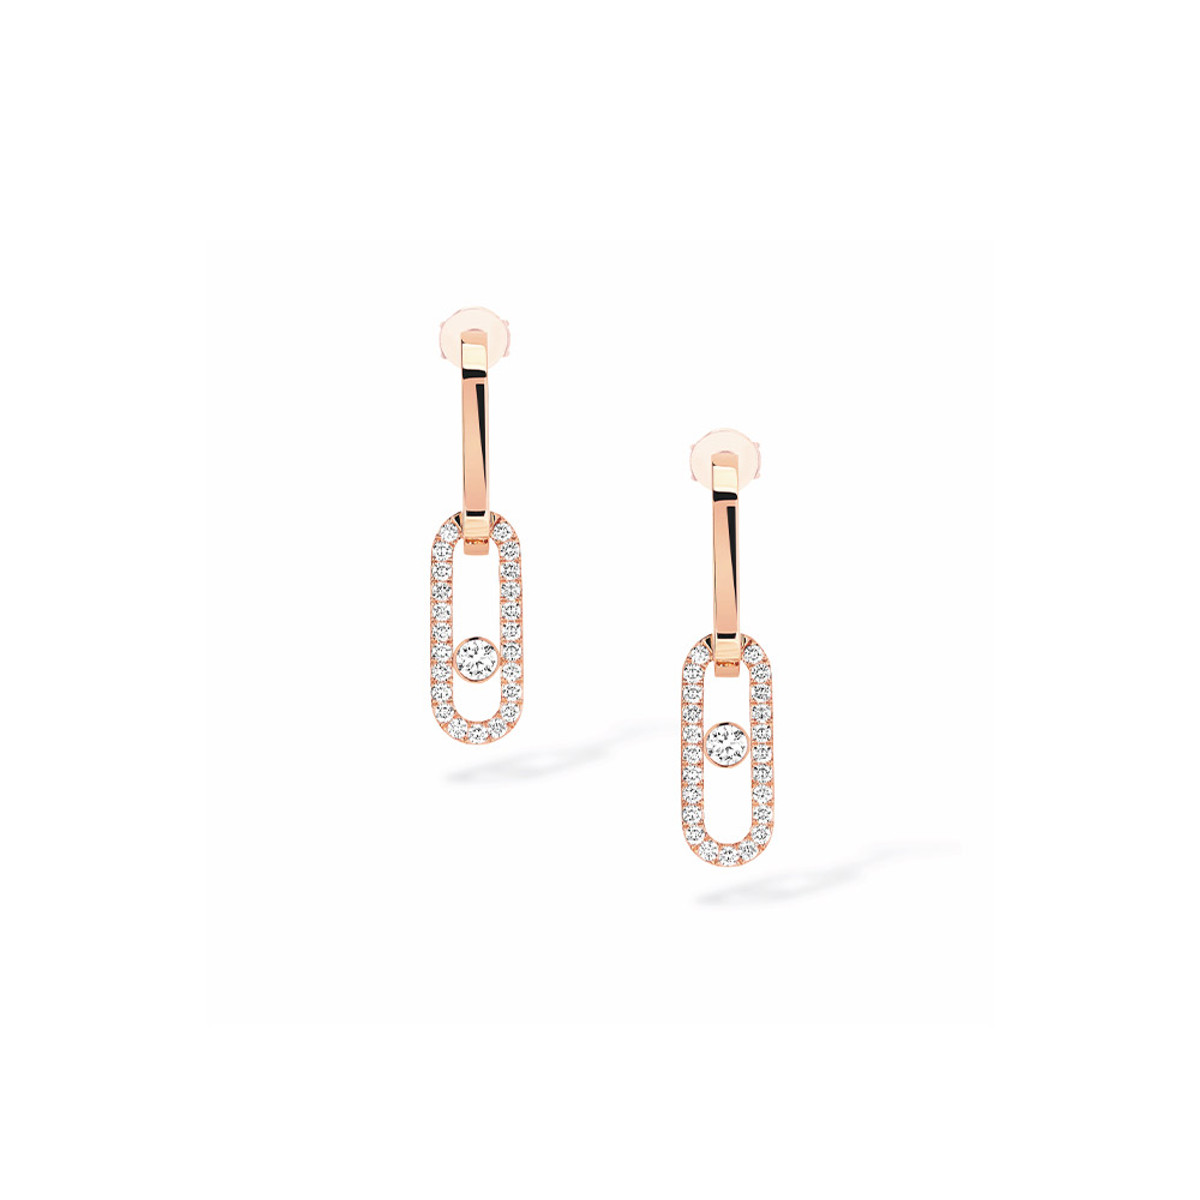 Messika 18K Rose Gold Move Link Diamond Earrings-56197 Product Image